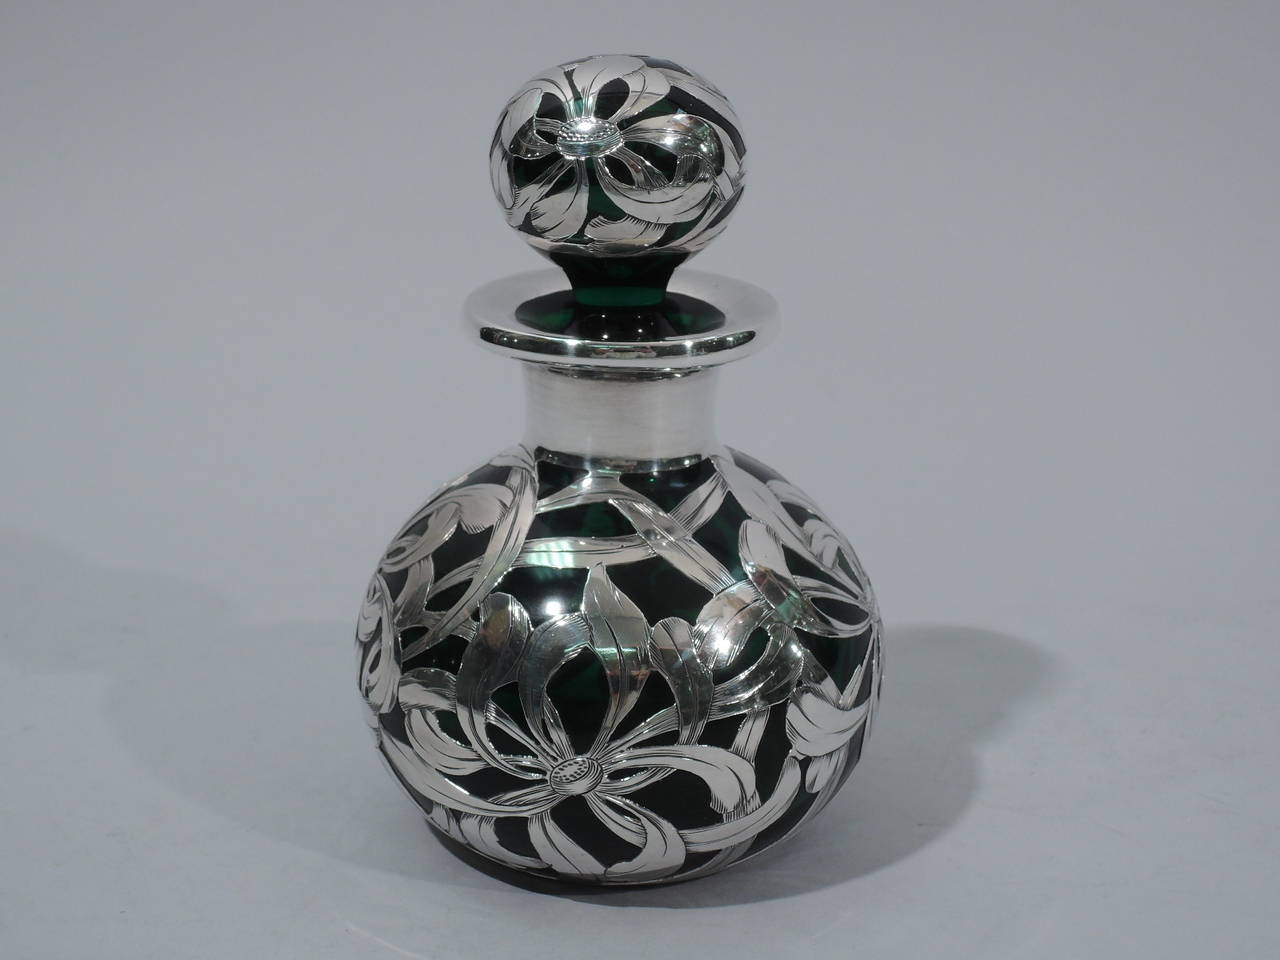 American Antique Emerald Glass Perfume Bottle with Floral Overlay